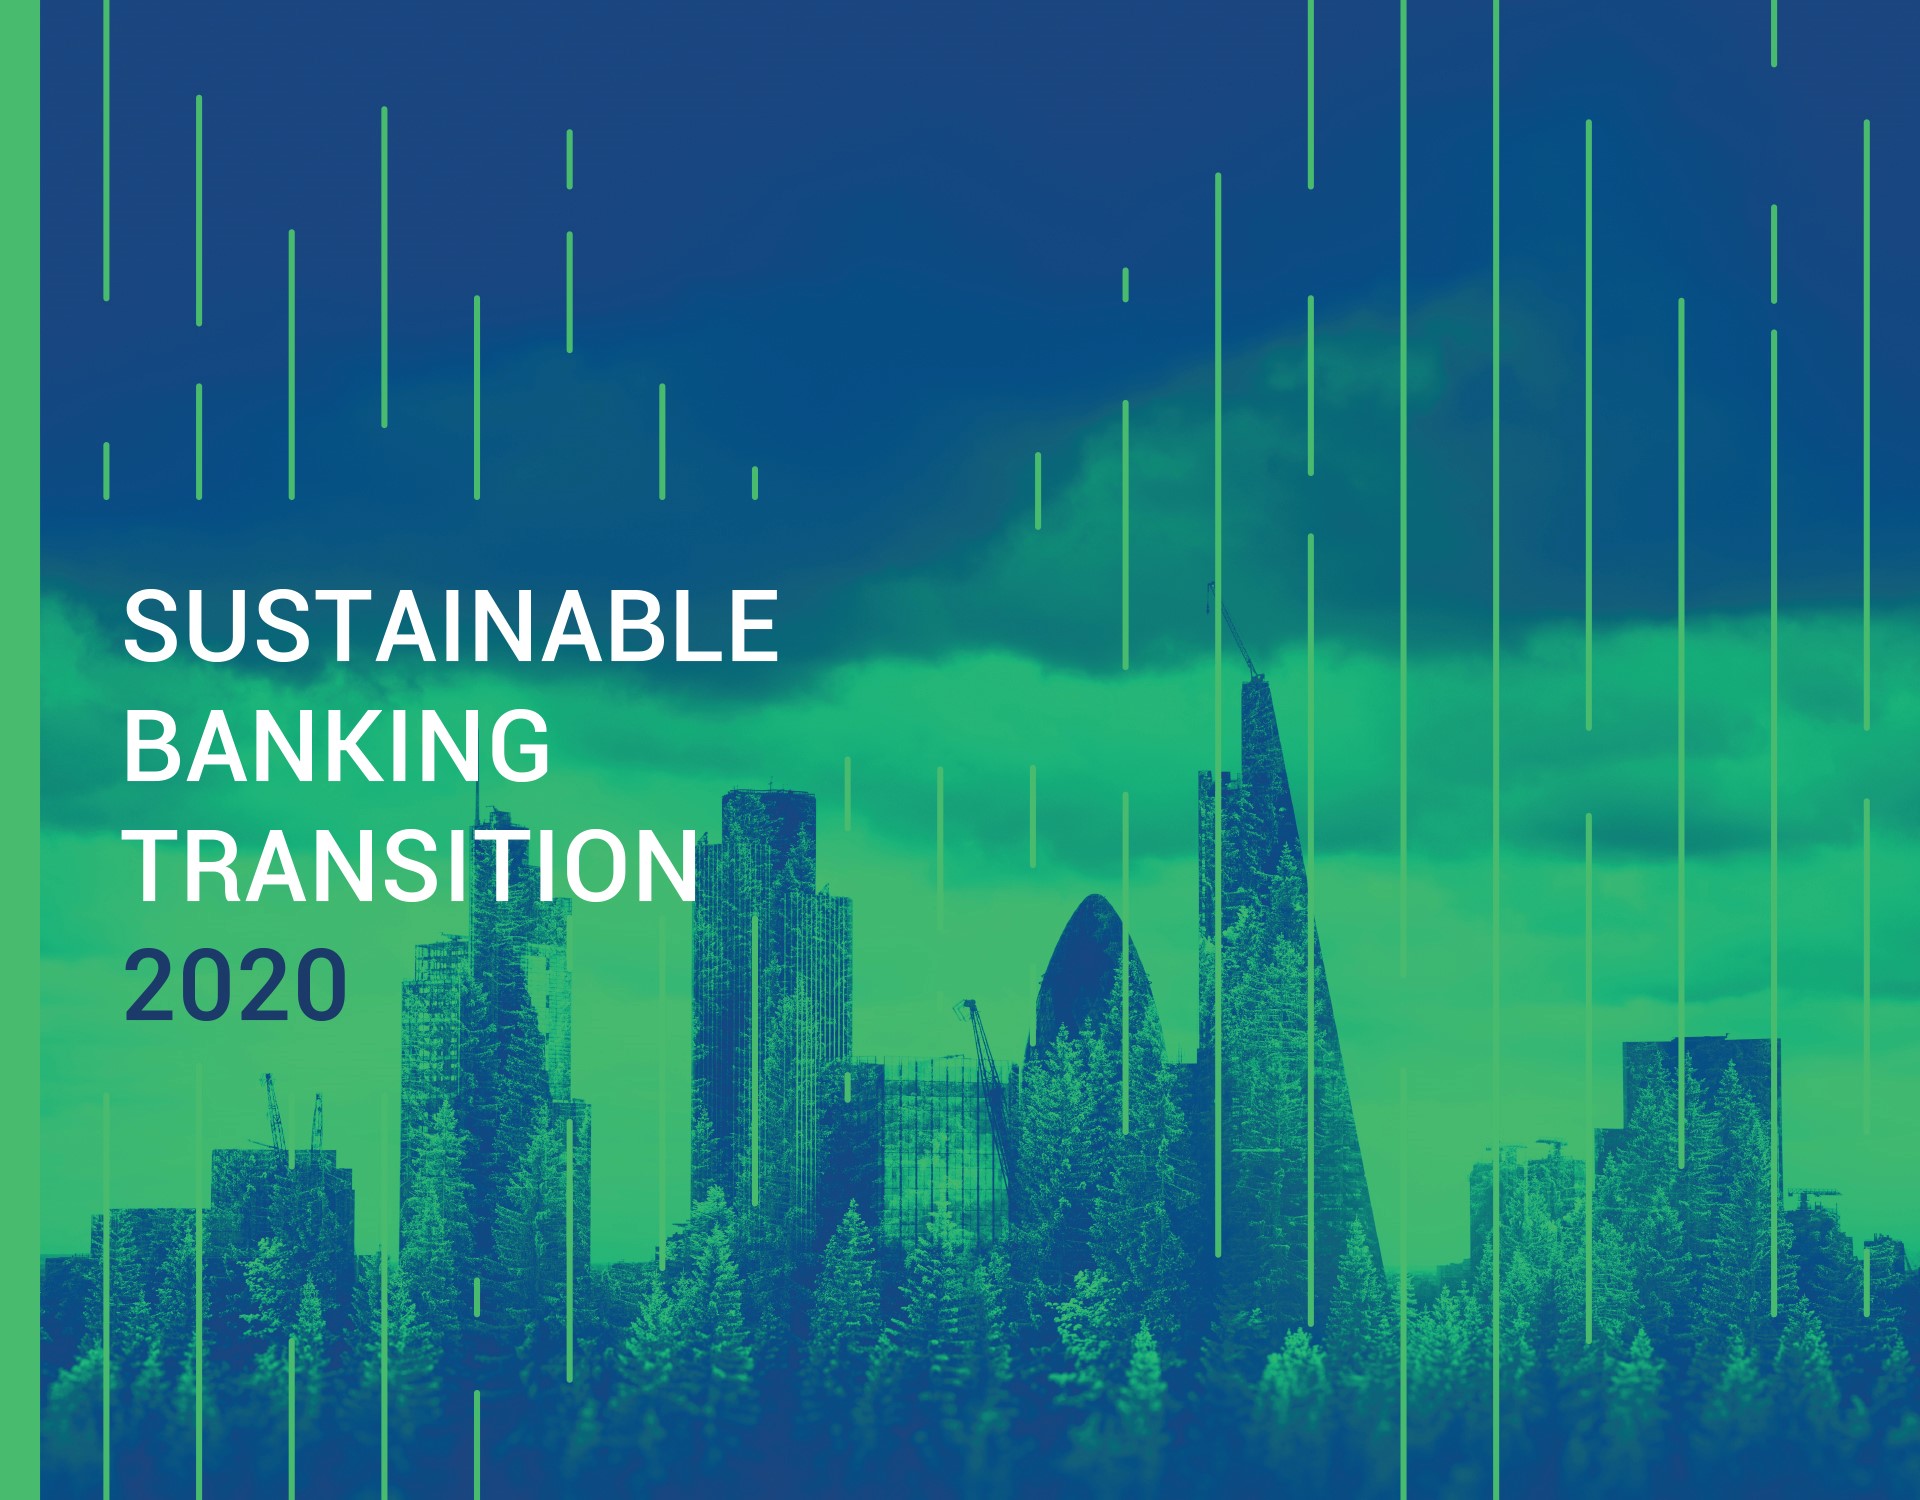 Rapporto Sustainable Banking Transition - SUSTAINABILITY? A NEW NORMAL BANKING